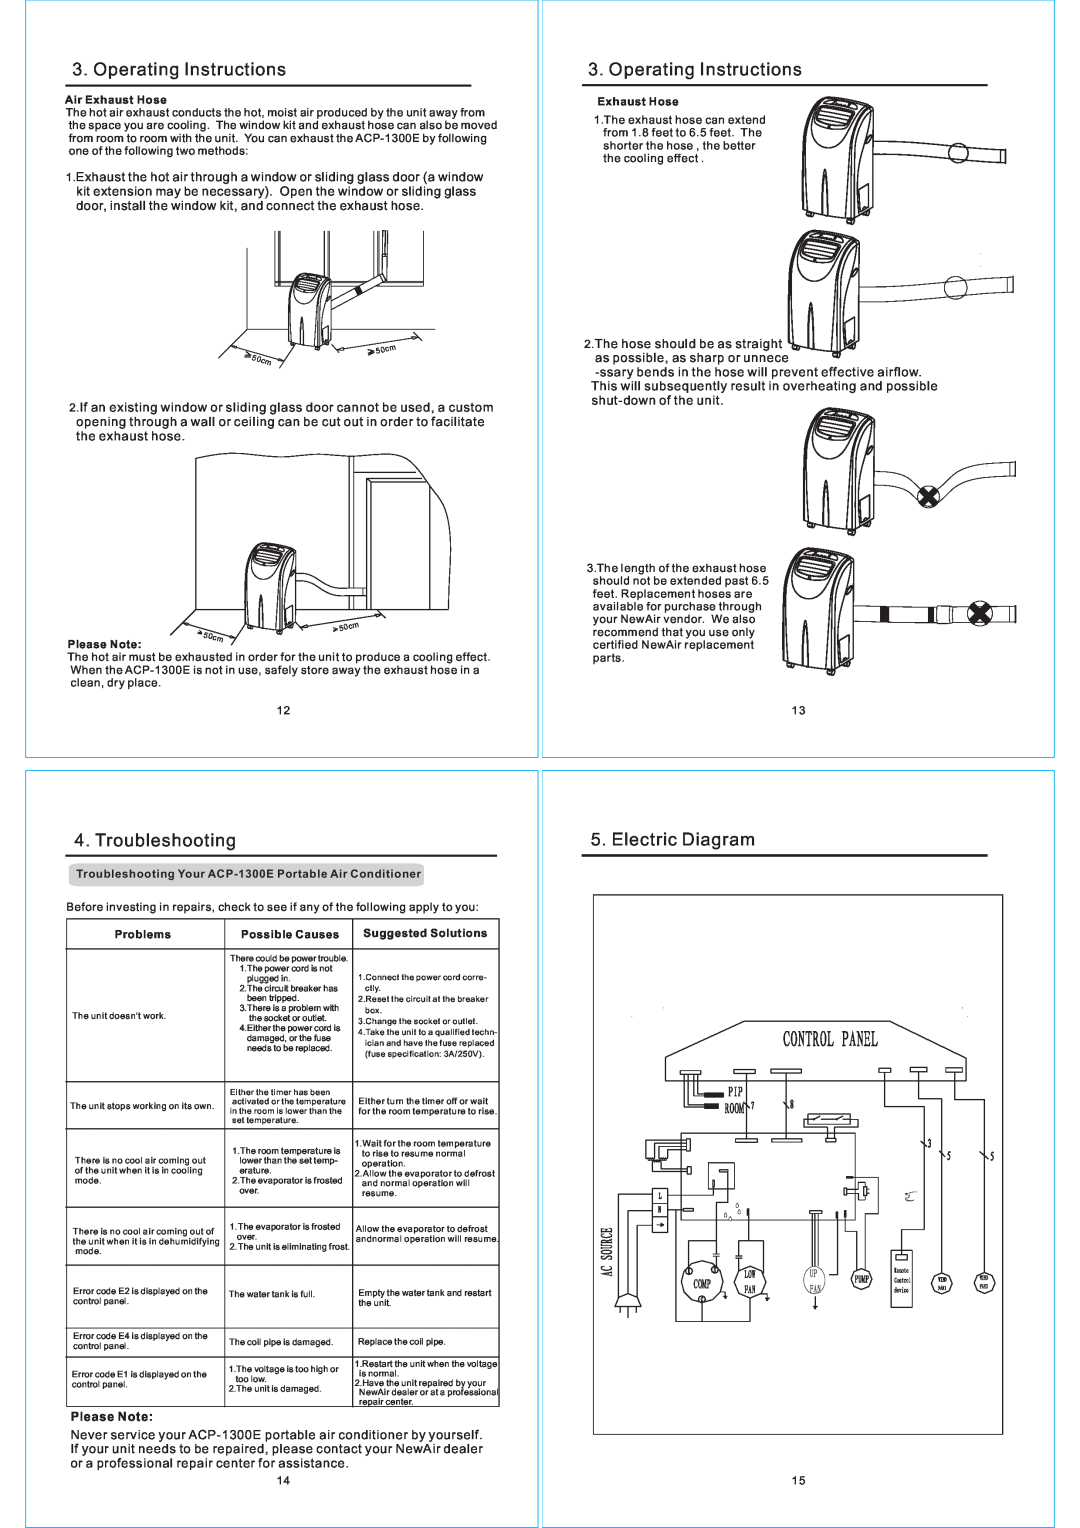 NewAir ACP-1300E owner manual Operating Instructions, Troubleshooting, Electric Diagram, Please Note 